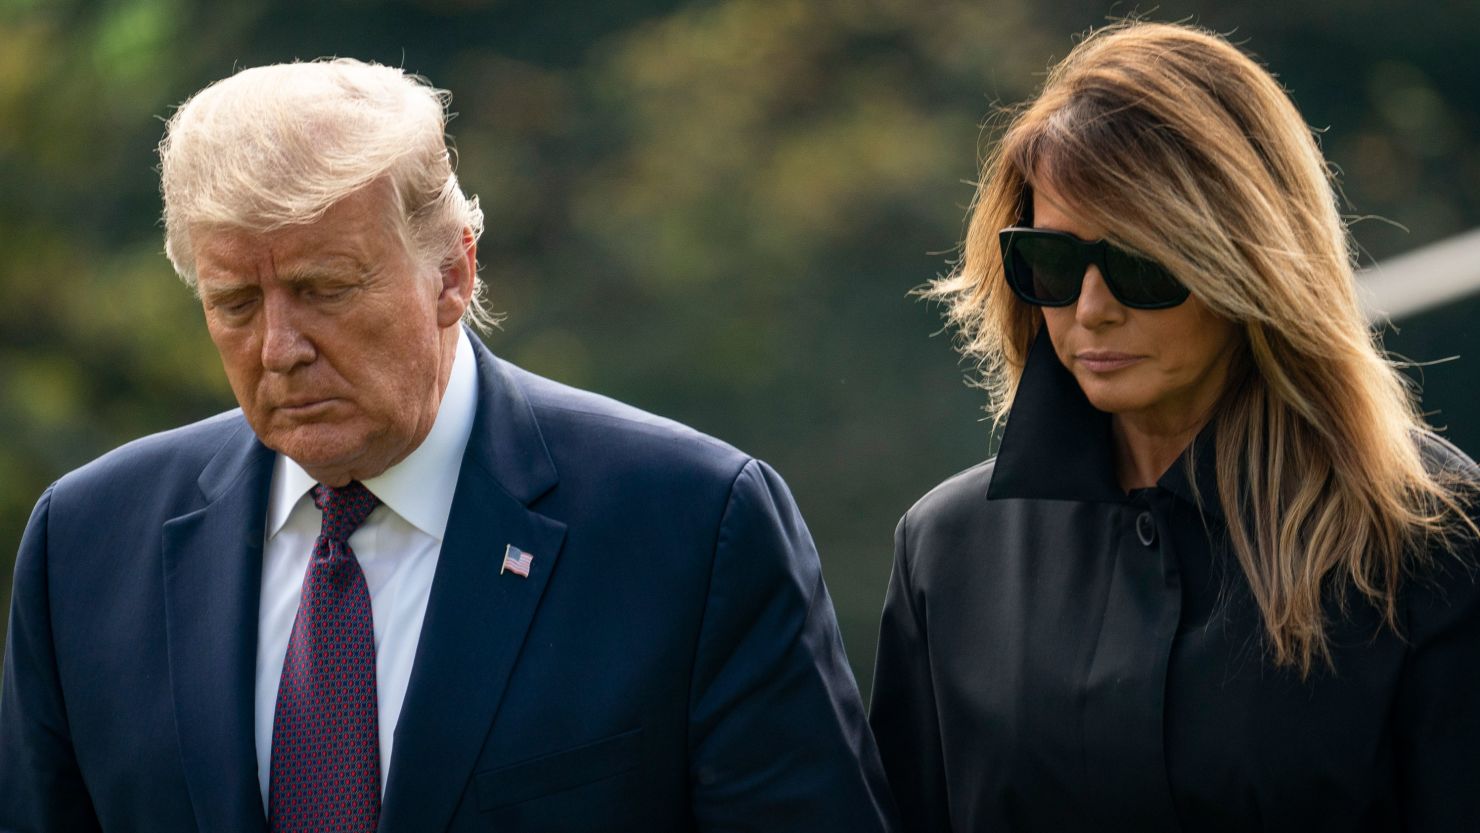 U.S. President Donald Trump and first lady Melania Trump walk to the White House residence as they exit Marine One on the South Lawn of the White House on September 11, 2020 in Washington, DC. (Photo by Drew Angerer/Getty Images)